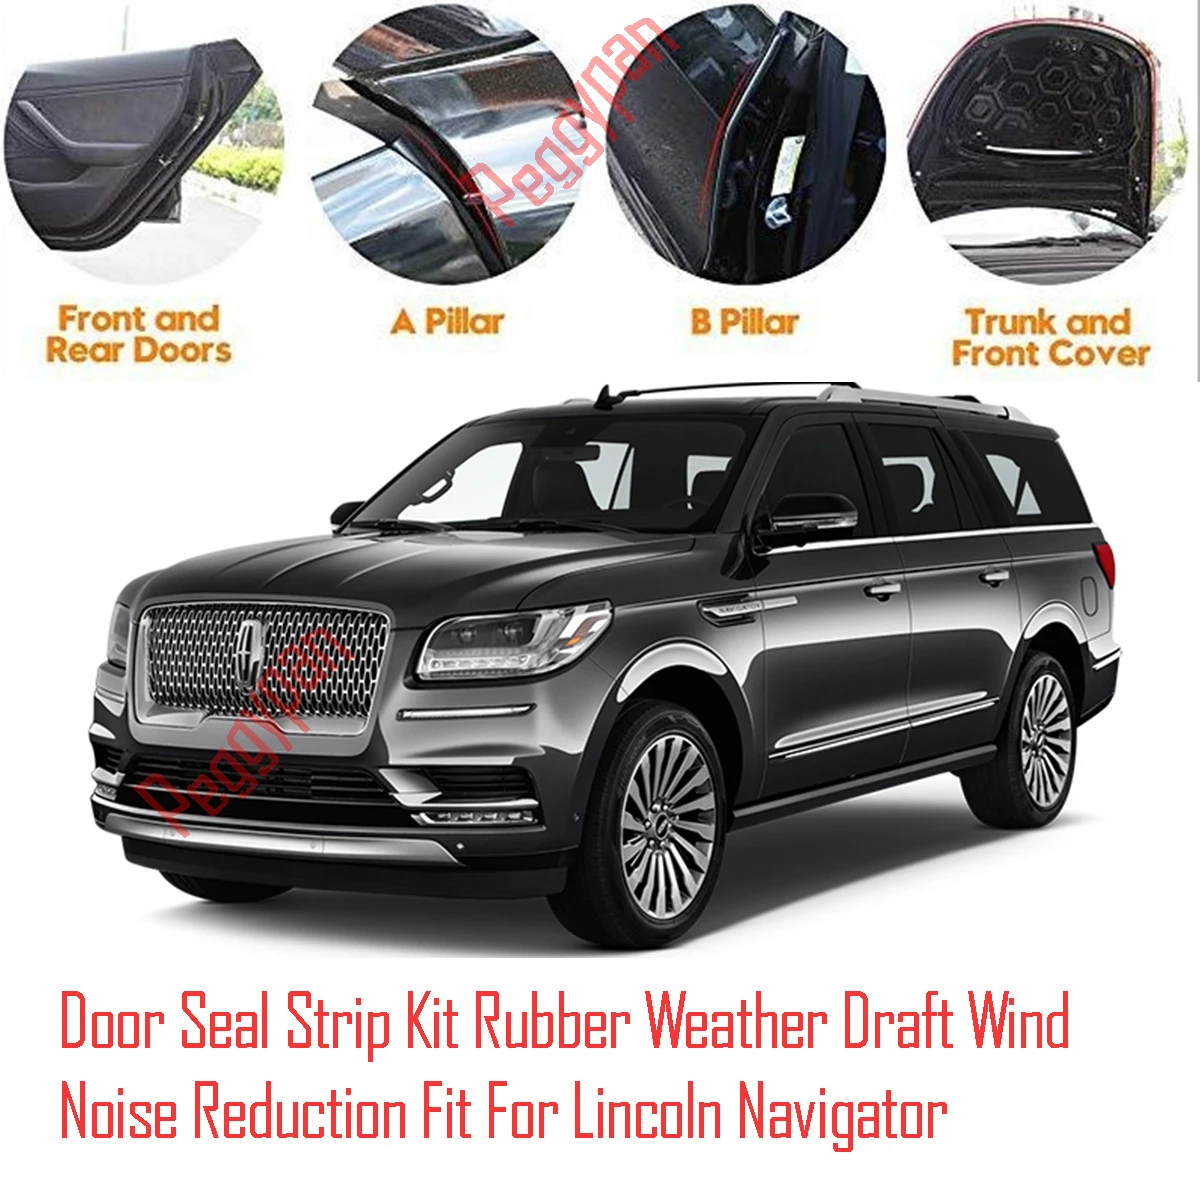 Door Seal Strip Kit Self Adhesive Window Engine Cover Soundproof Rubber Weather Draft Wind Noise Reduction For Lincoln Navigator